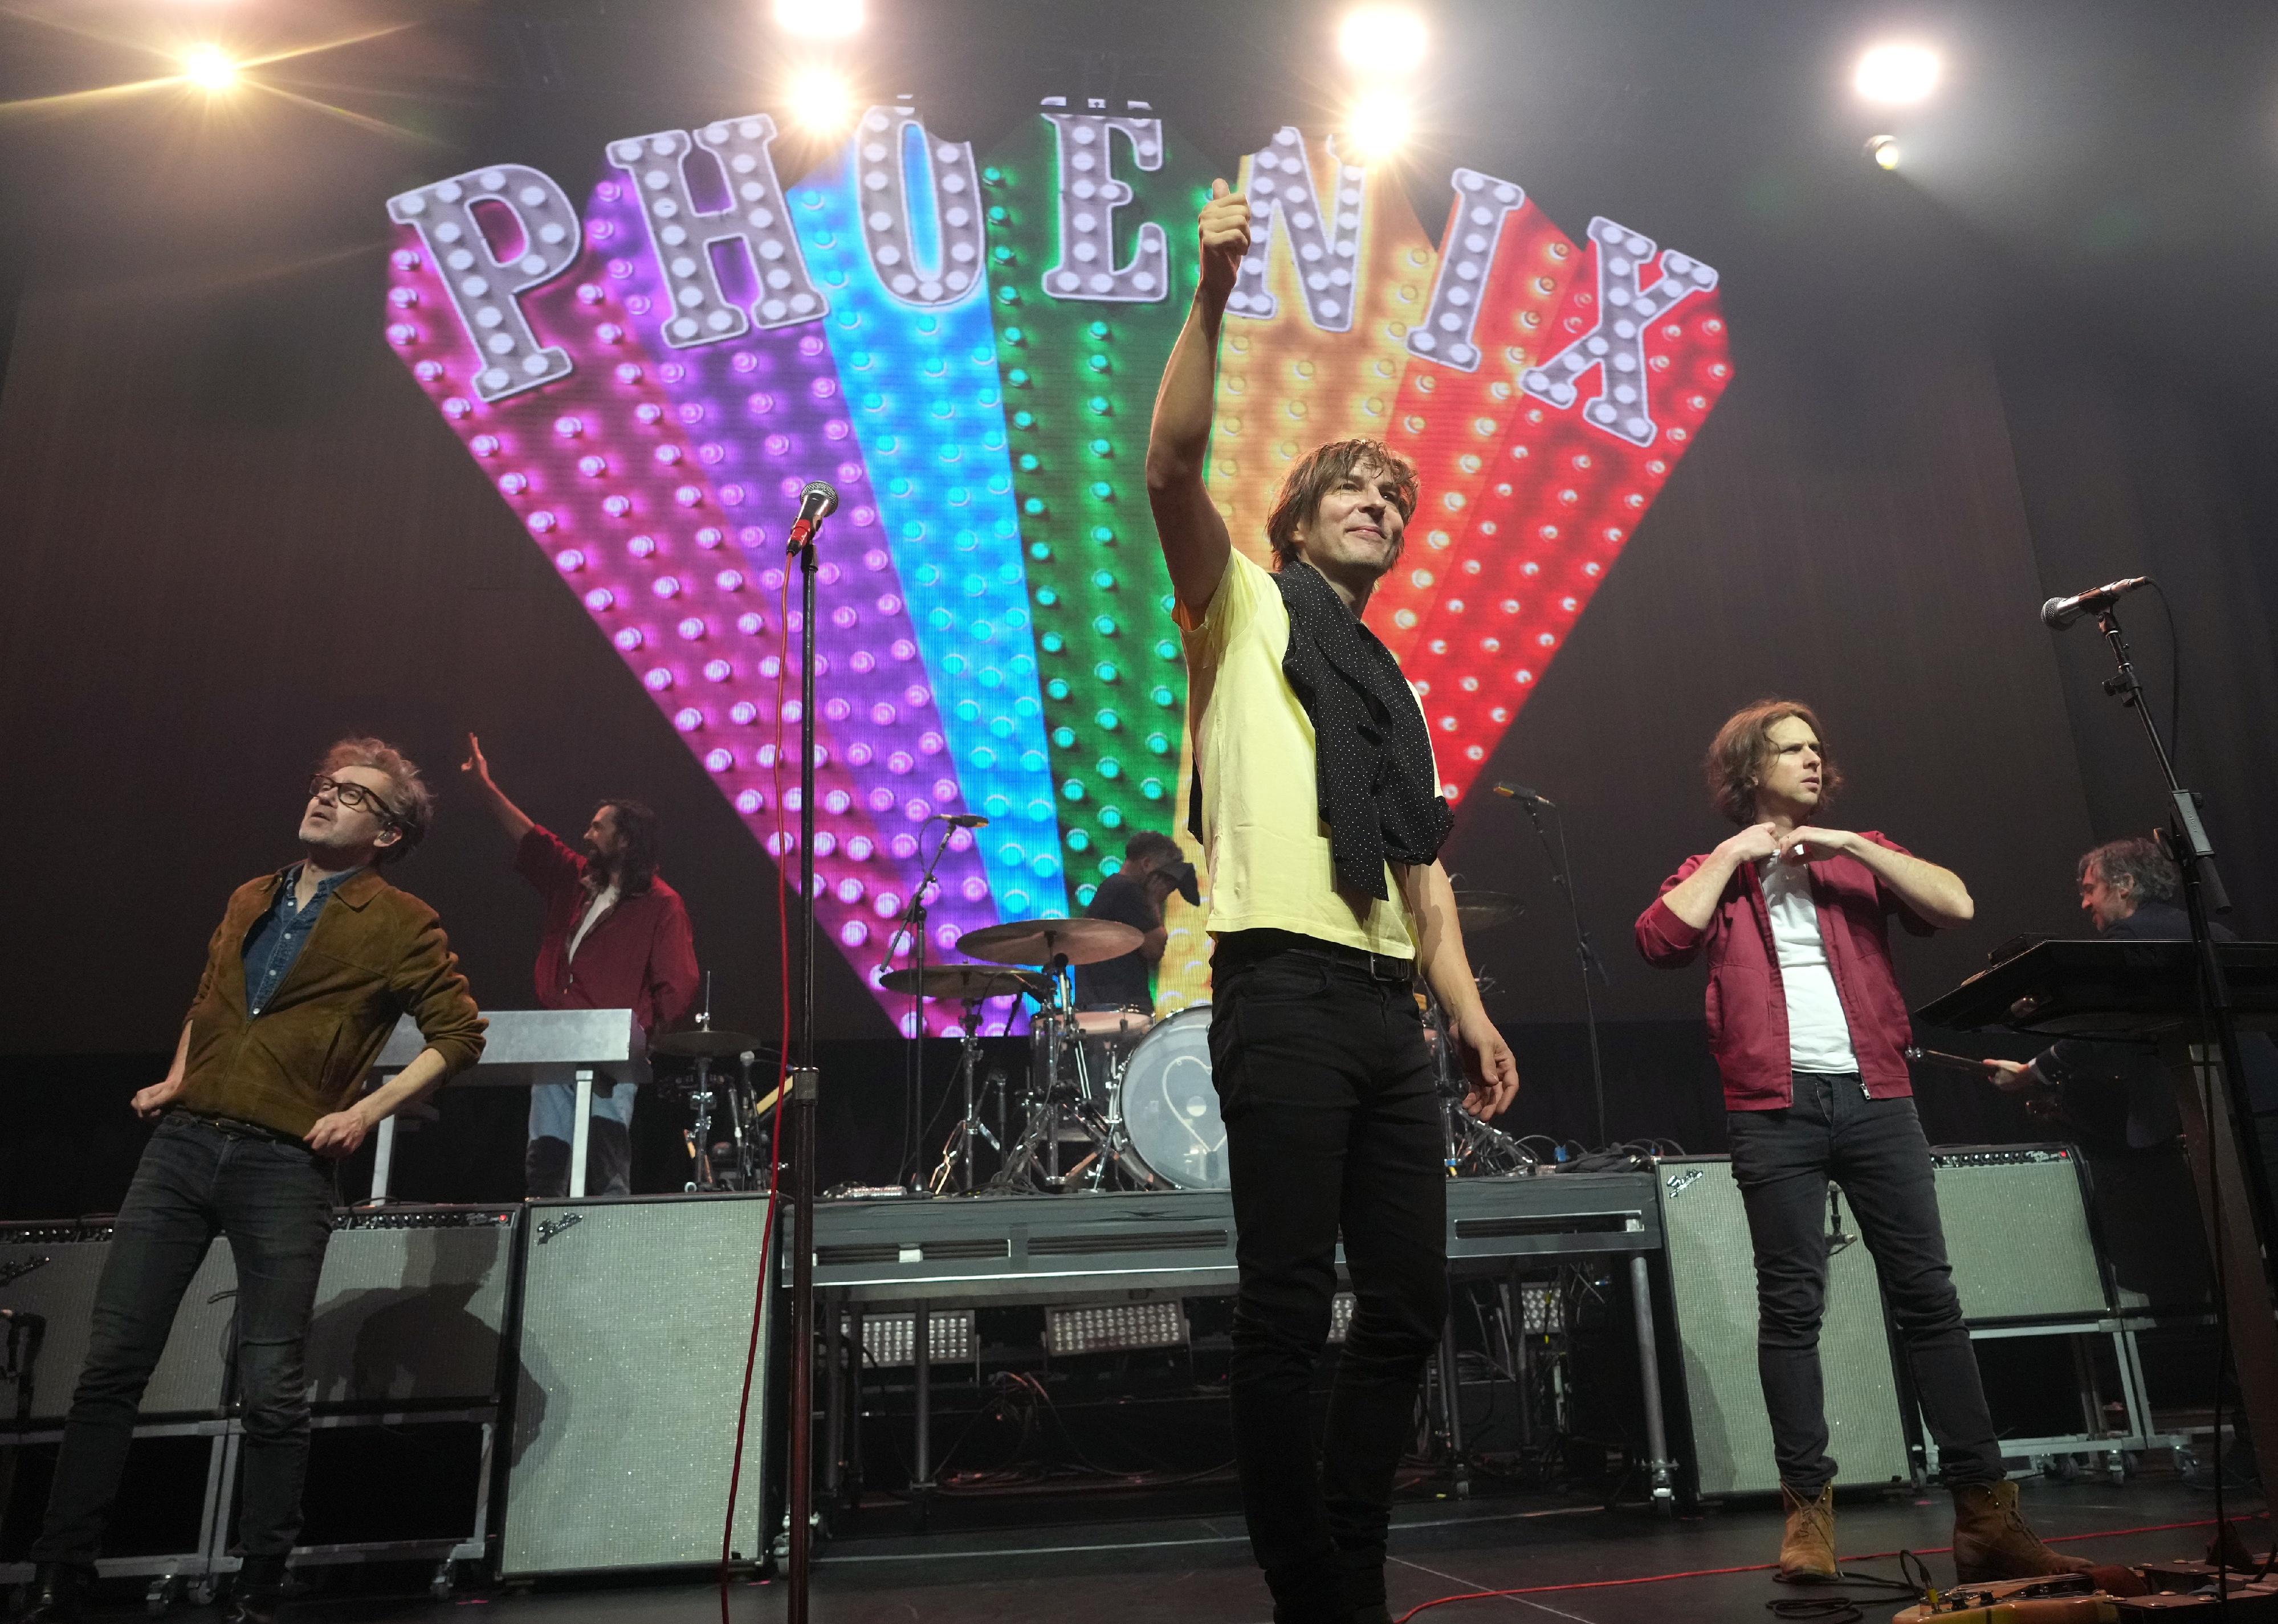 Phoenix performing onstage in front of a neon rainbow.